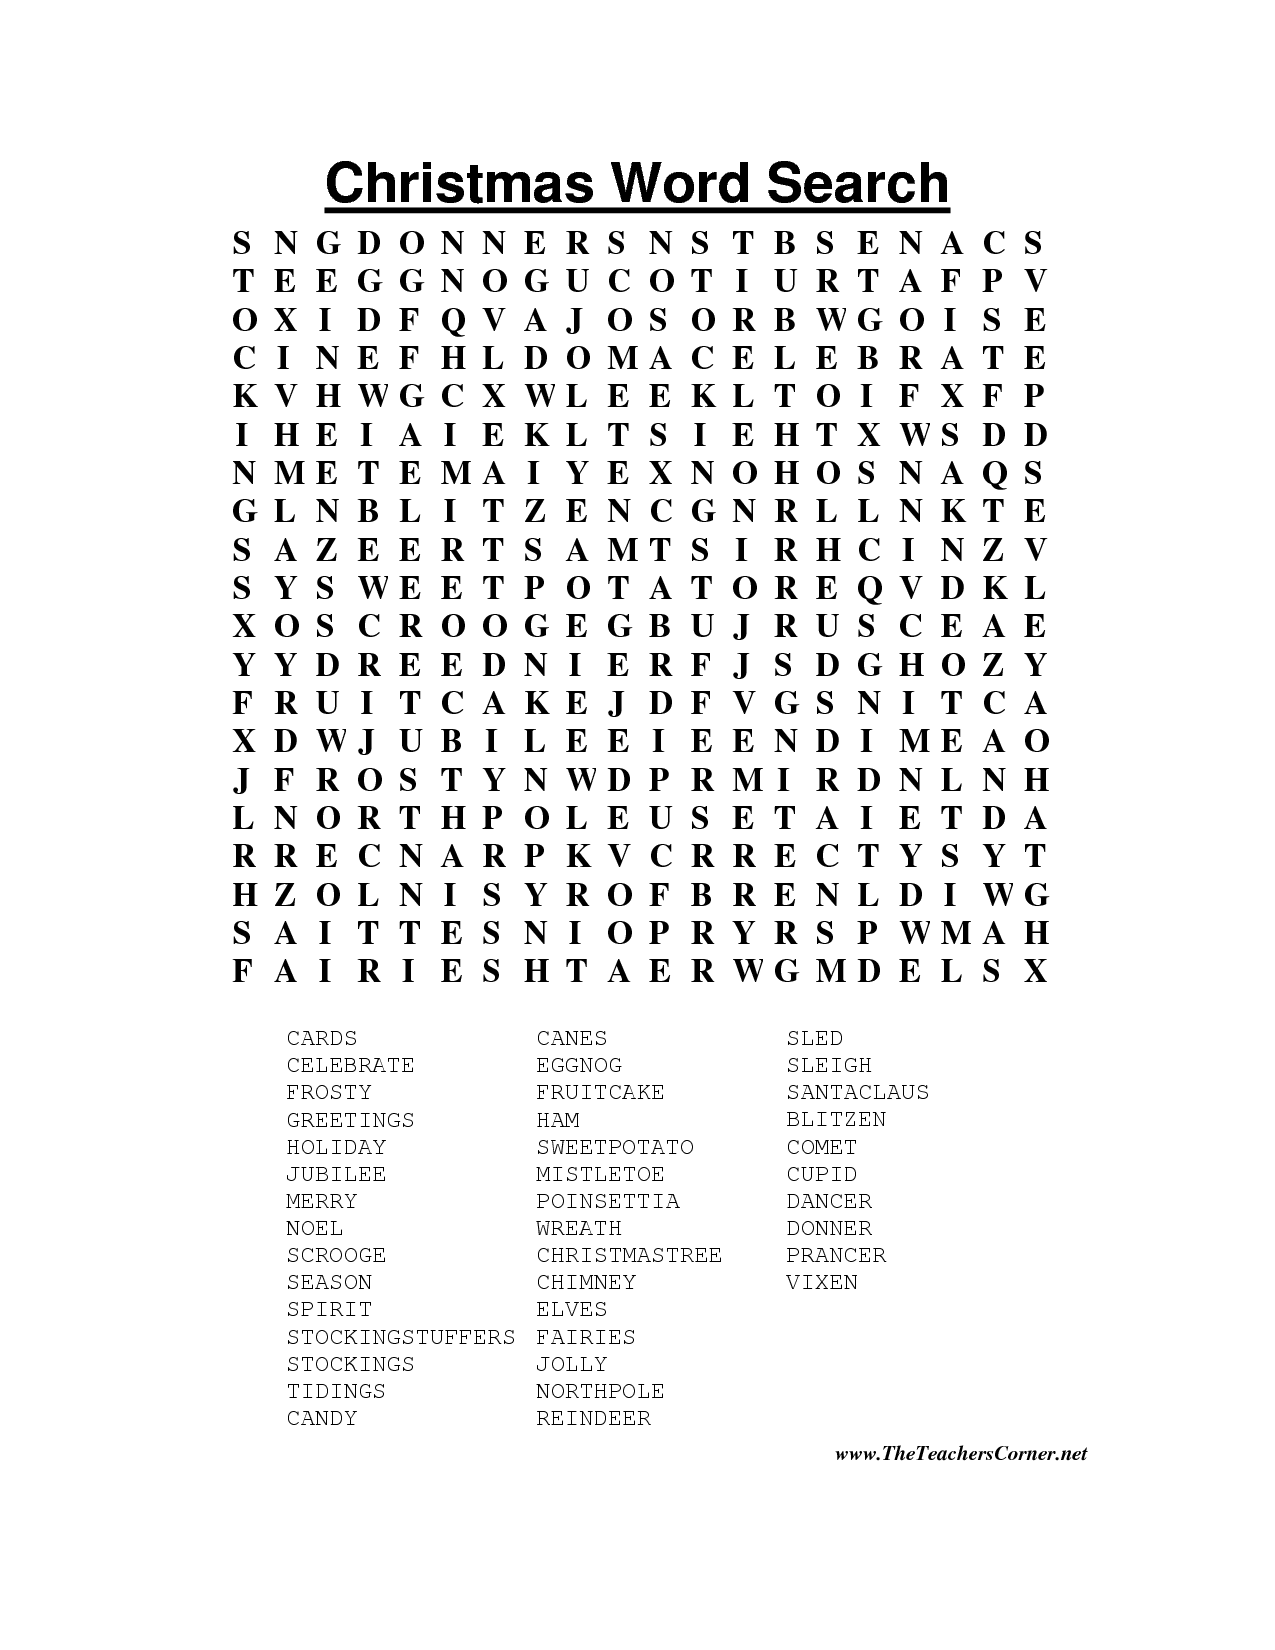 Christmas Word Searches Puzzles Image